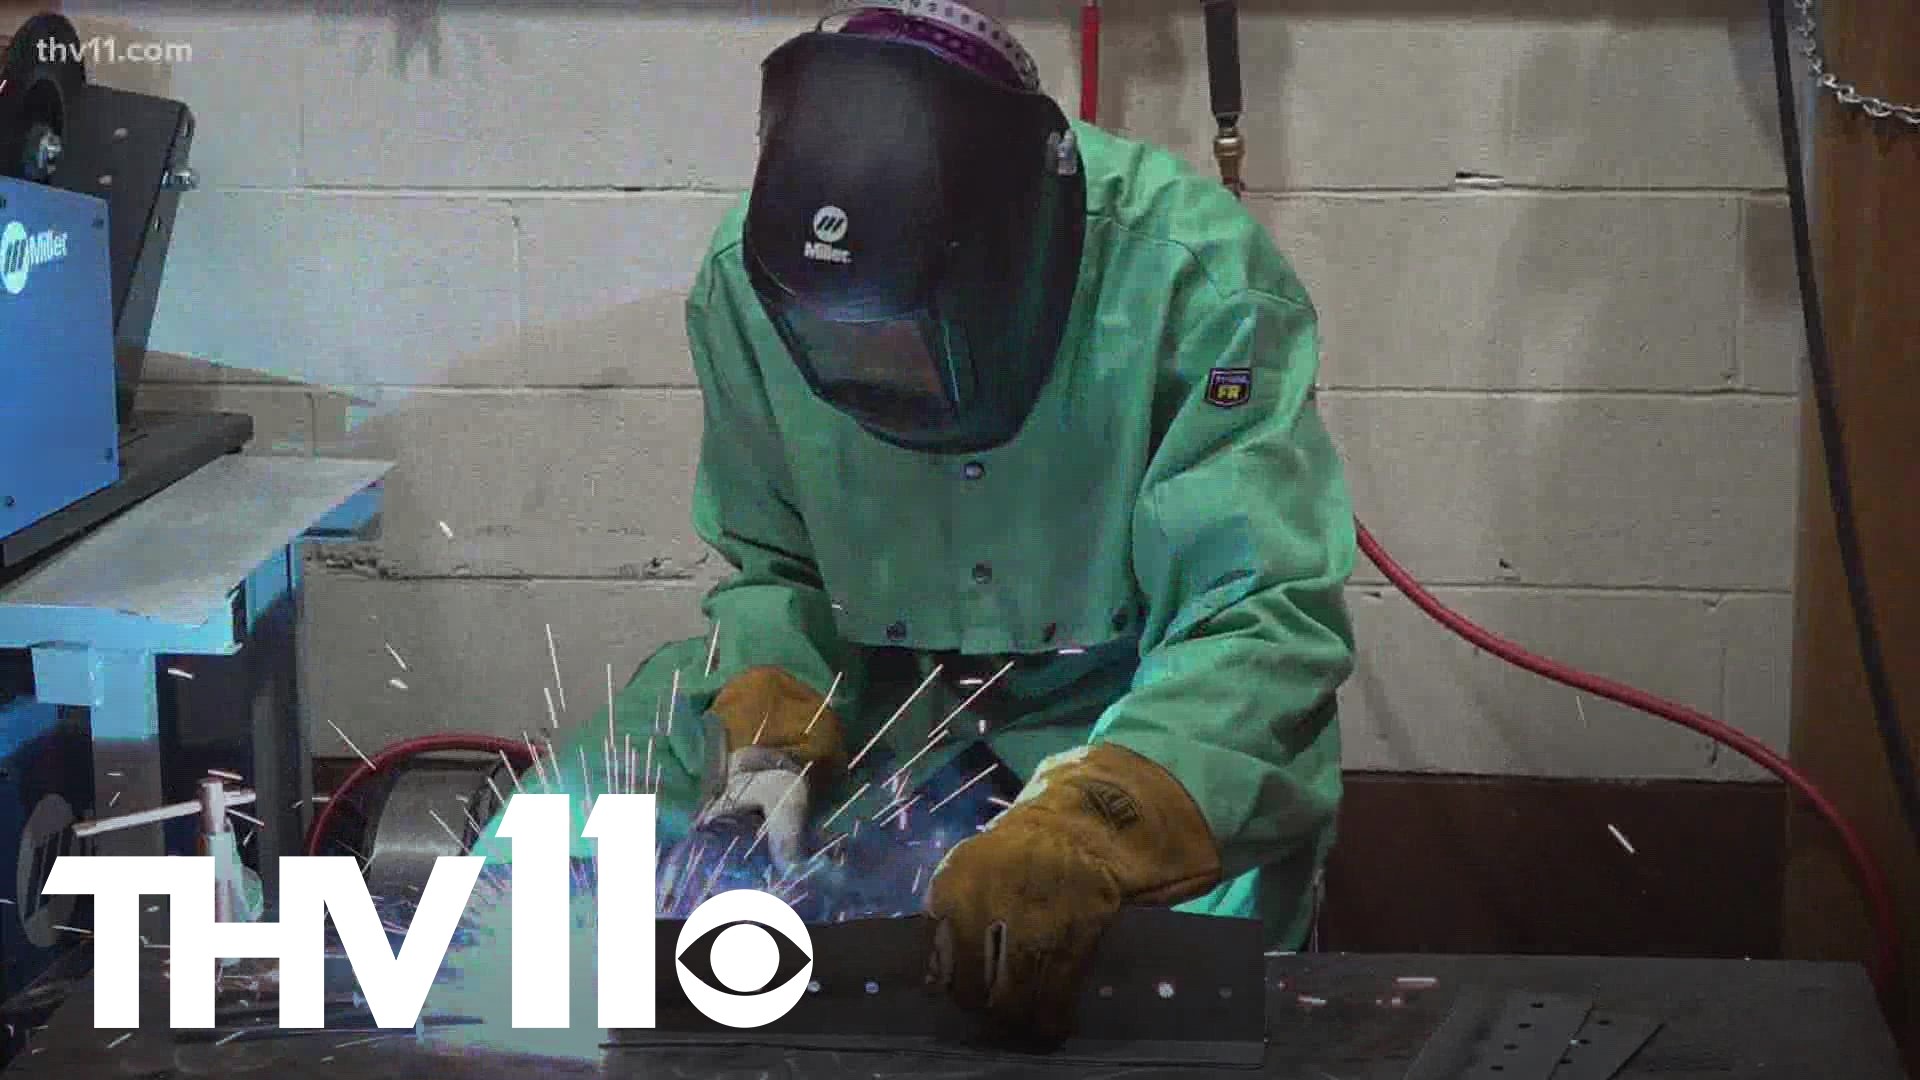 A manufacturing company in Pine Bluff is getting creative with recruiting future employees by partnering with a local school district to spark interest in welding.